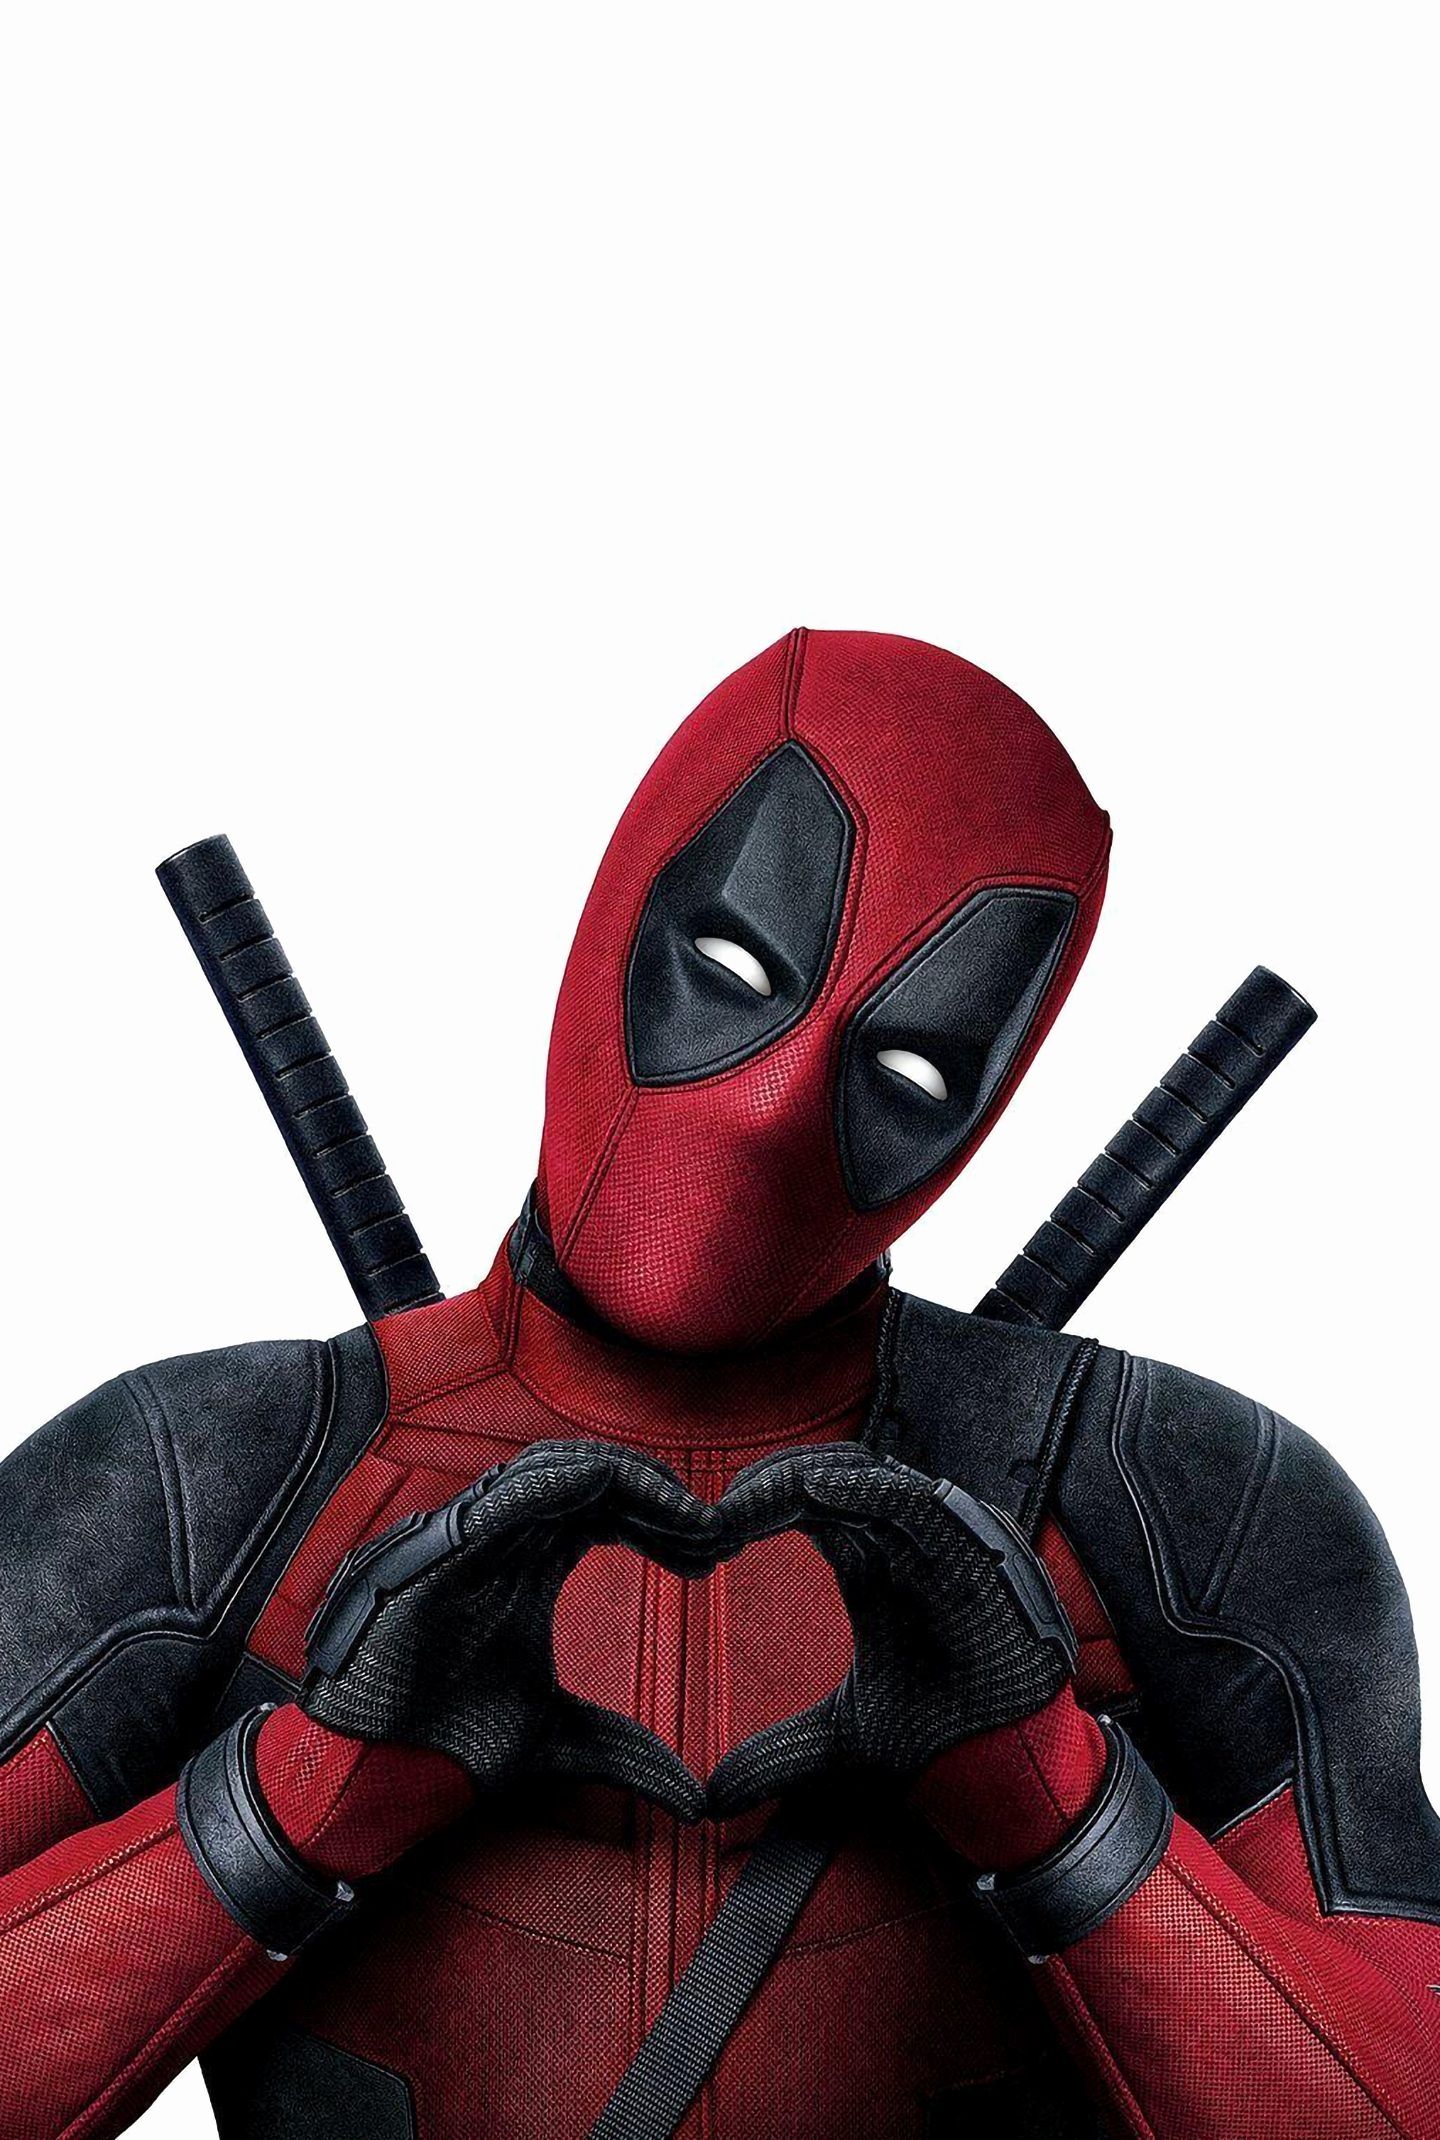 Best Of Deadpool android Wallpaper 2019